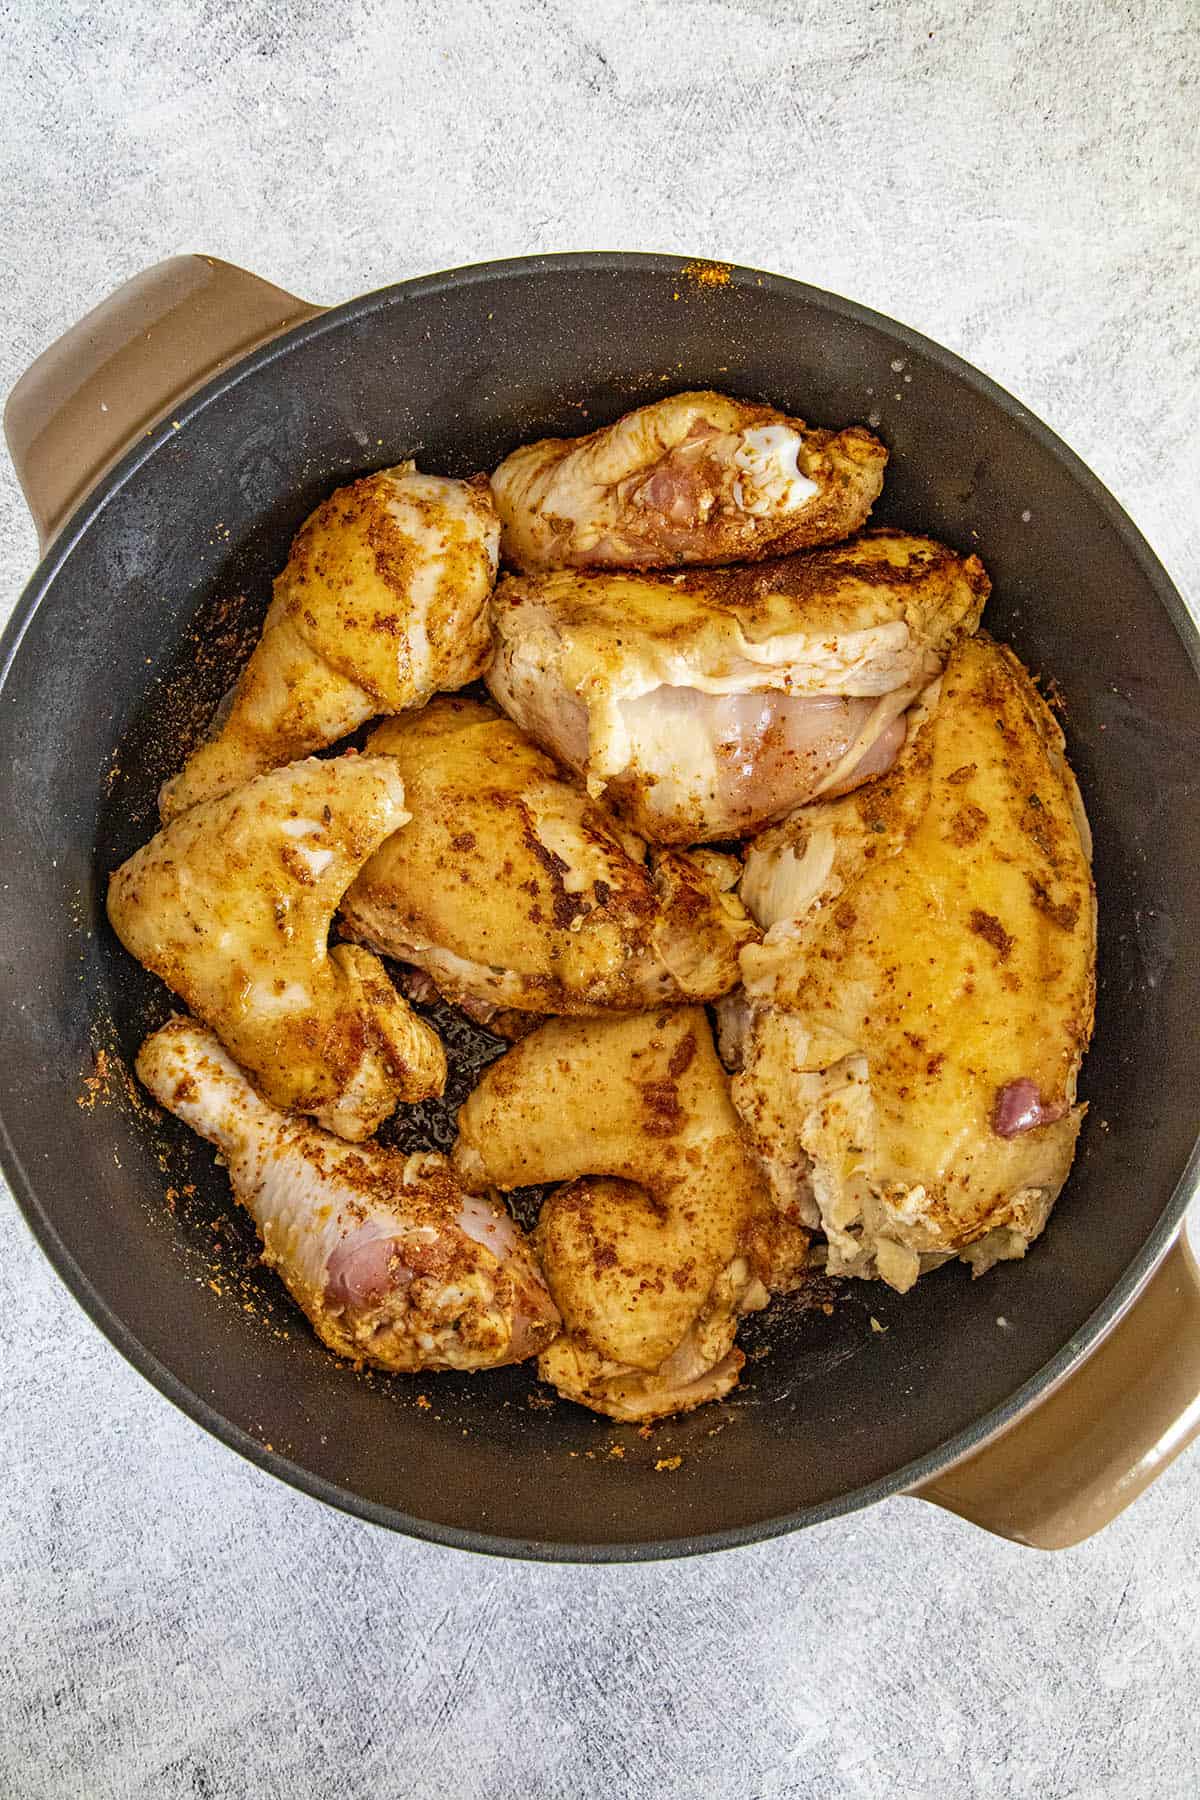 Browing the chicken in a large pot